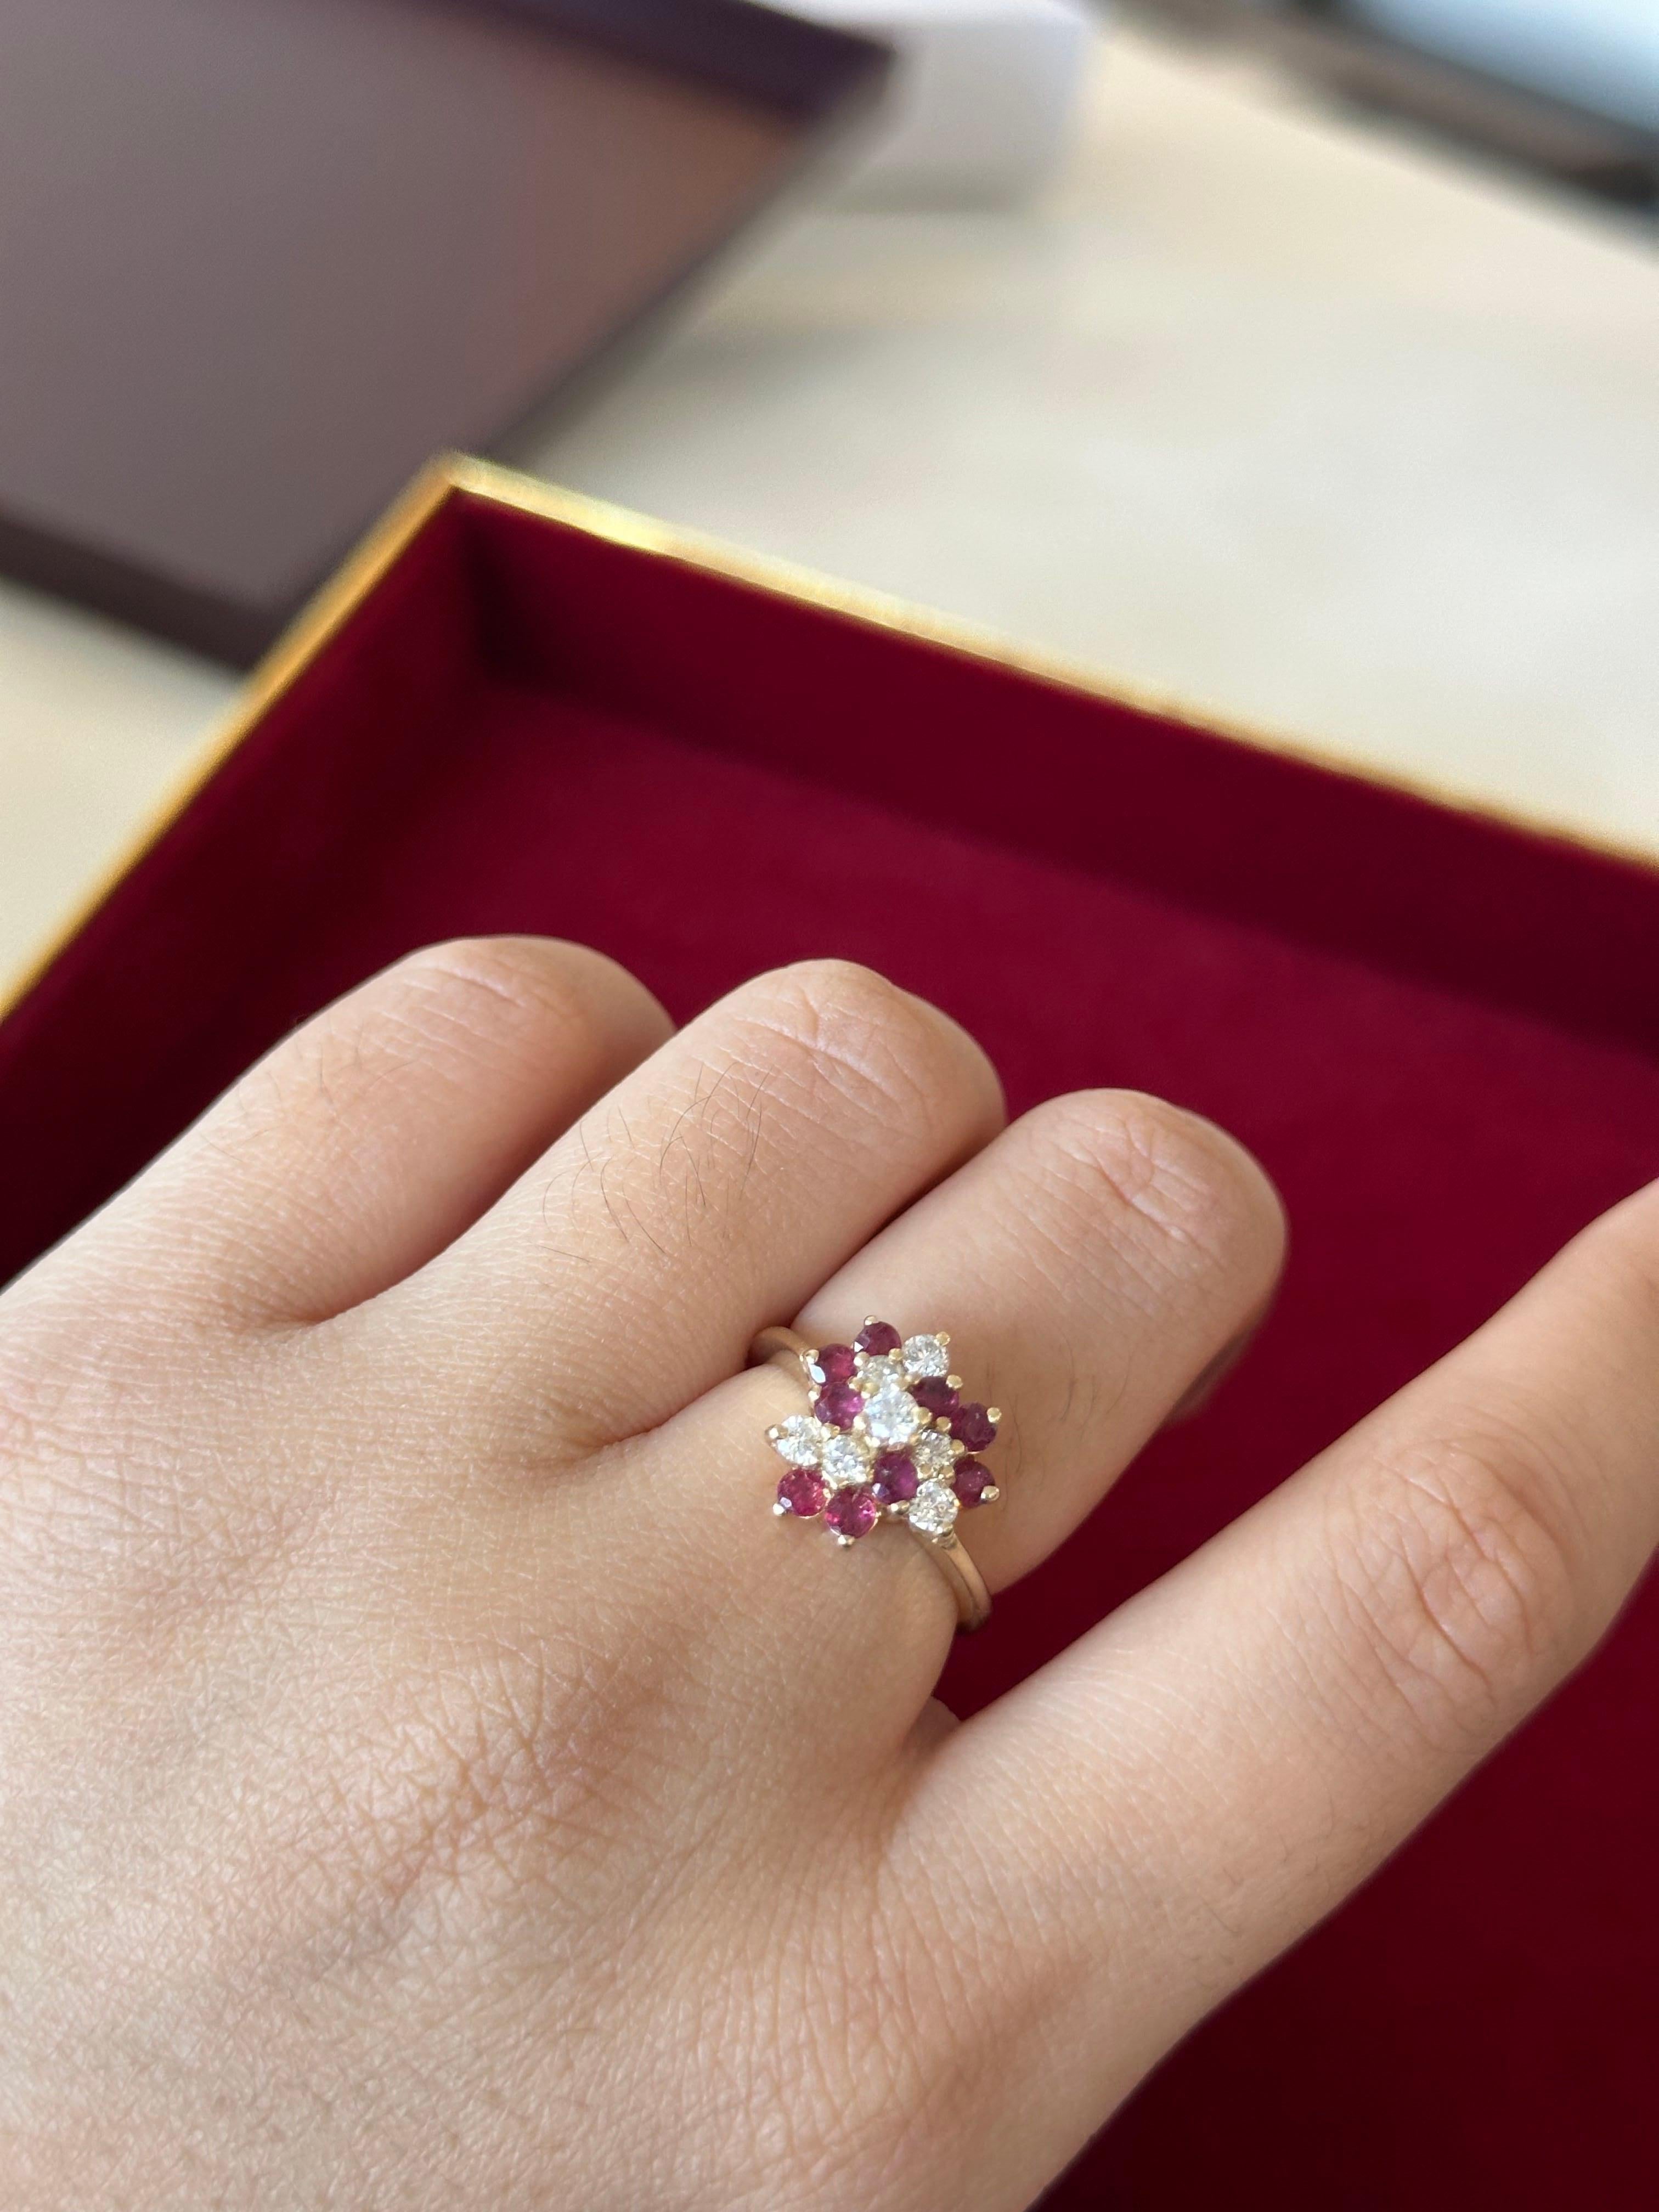 14K Yellow Gold Ring with 0.70 ctw of natural diamonds and 0.90 ctw natural ruby. 
Metal: 14K Solid Gold.
Diamond color: E-F.
Diamond clarity: VS1-VS2.
Diamond weight: 0.70 ctw.
Ruby weight: 0.90.
Total ring weight: 4.14 grams.
